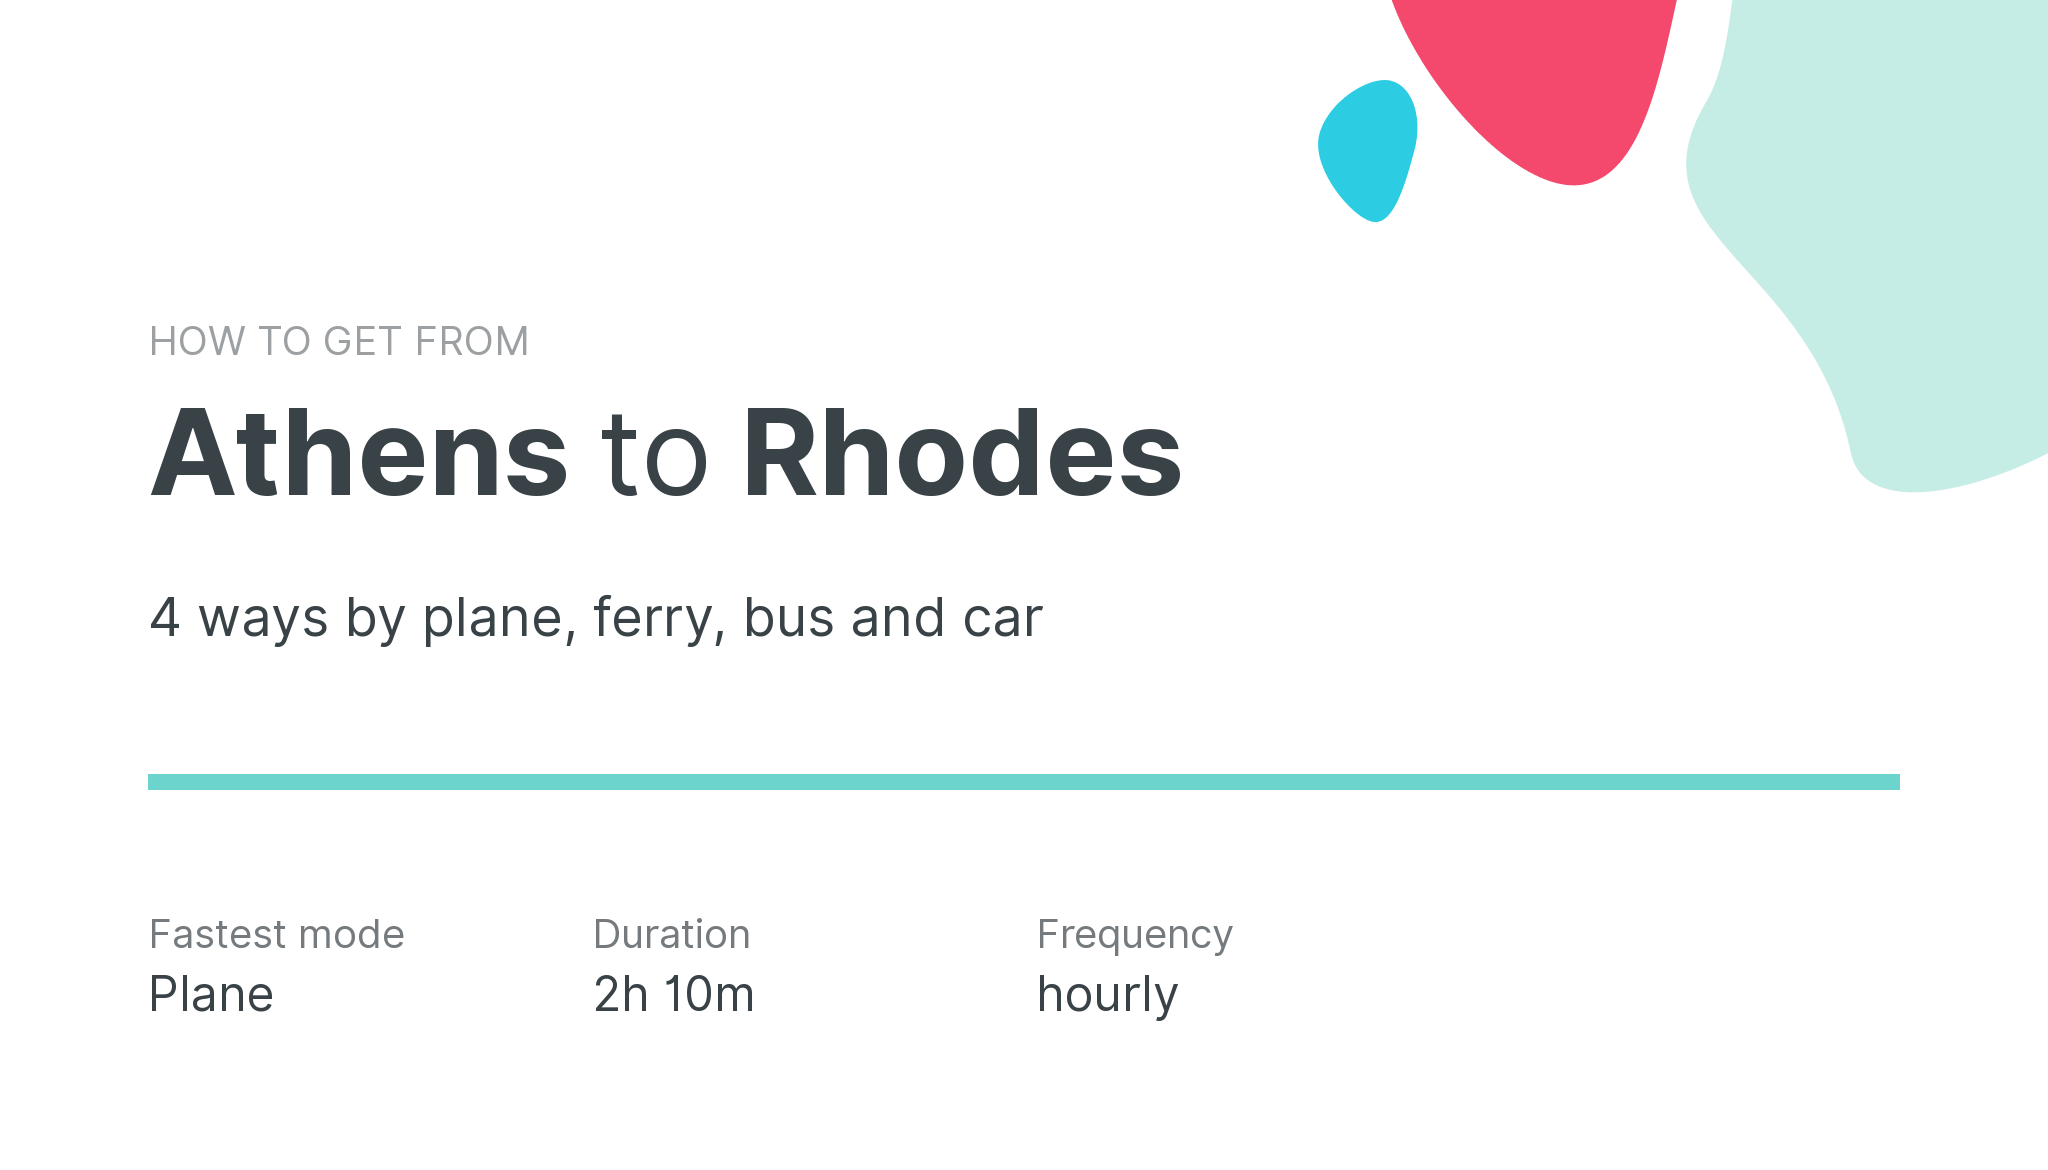 How do I get from Athens to Rhodes